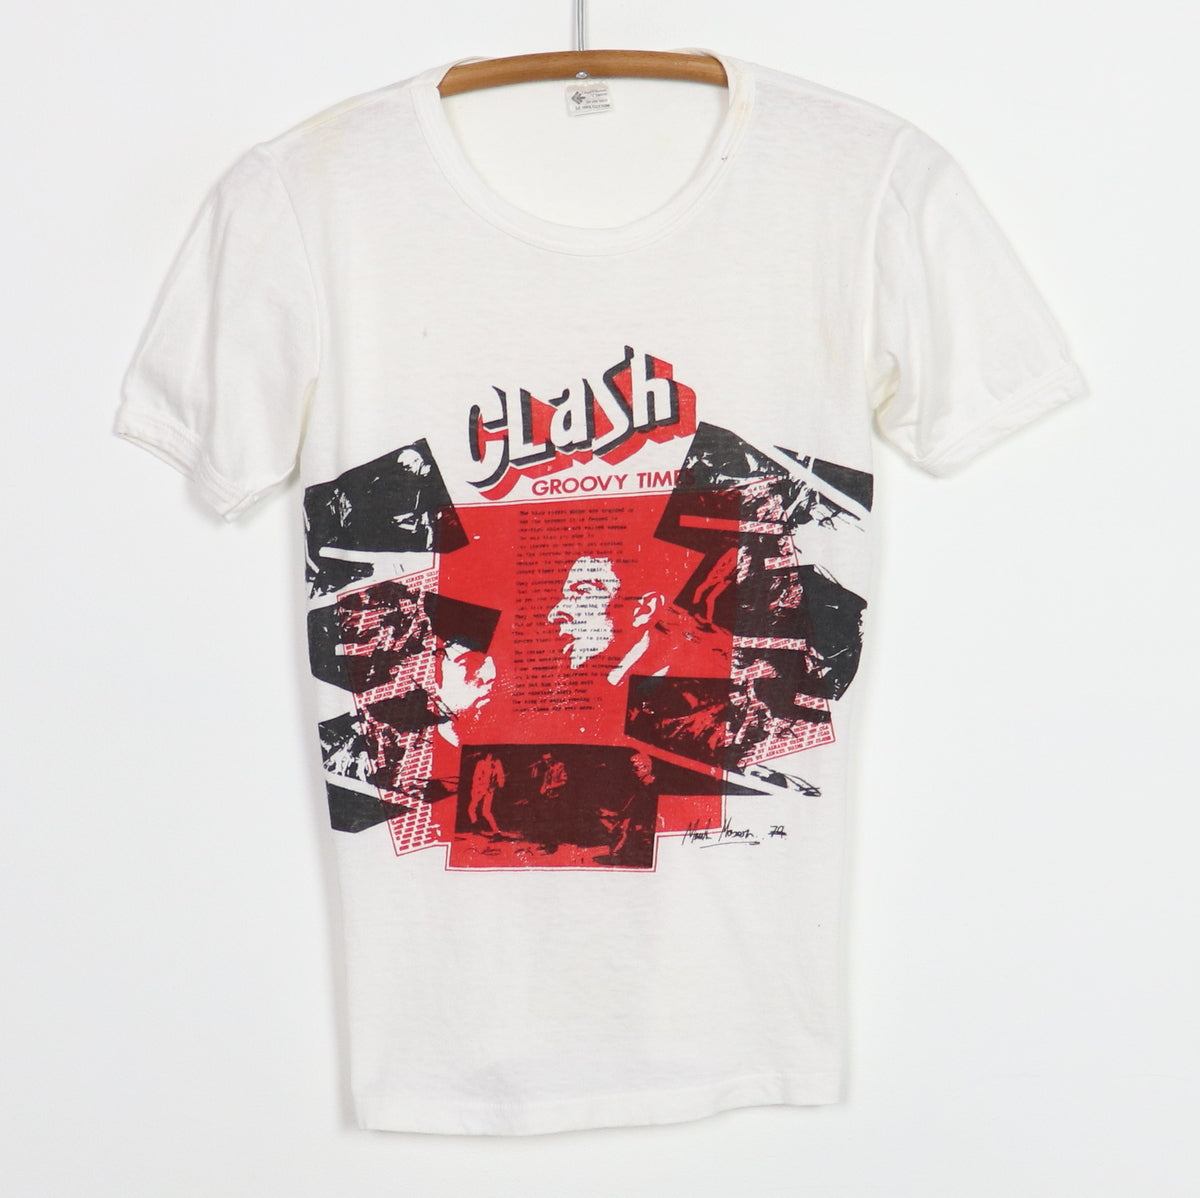 1979 The Clash Groovy Times Shirt